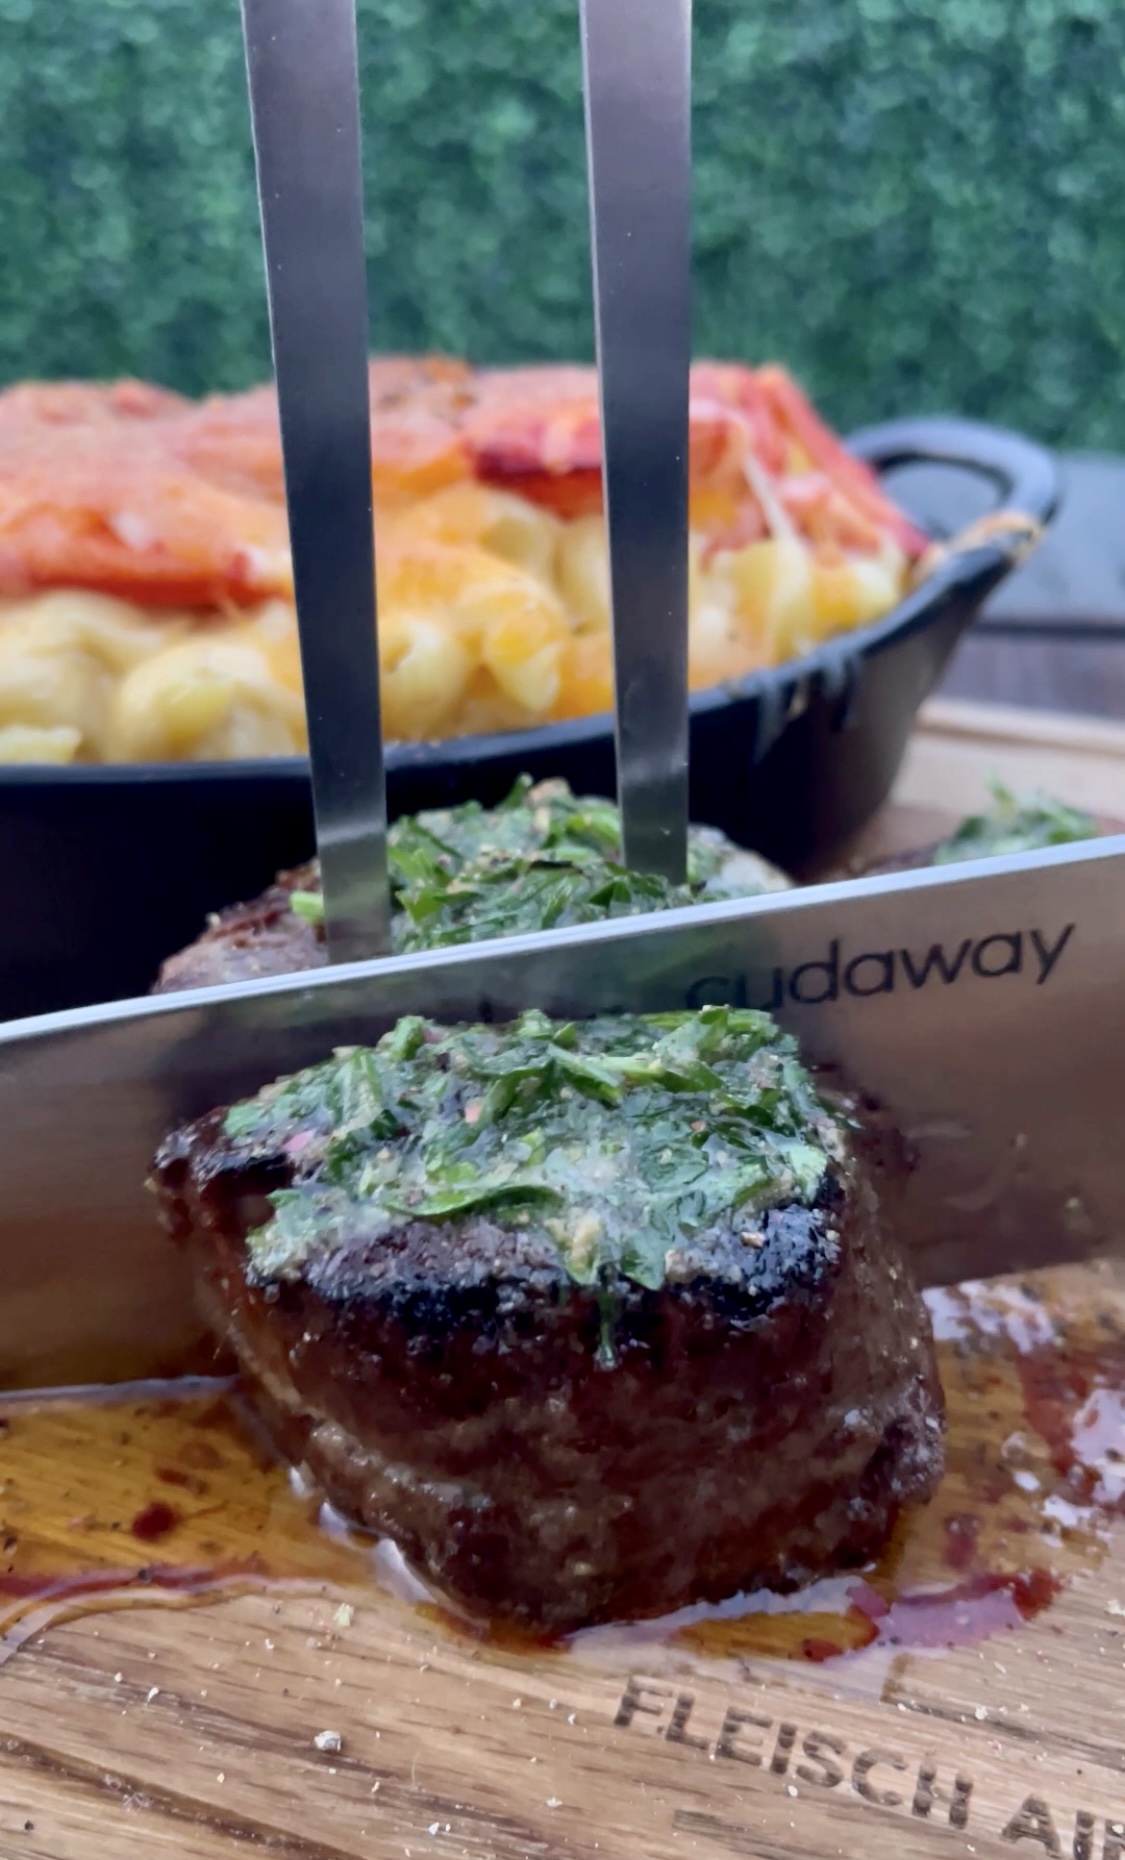 Cudaway Knives-The best knives for BBQ